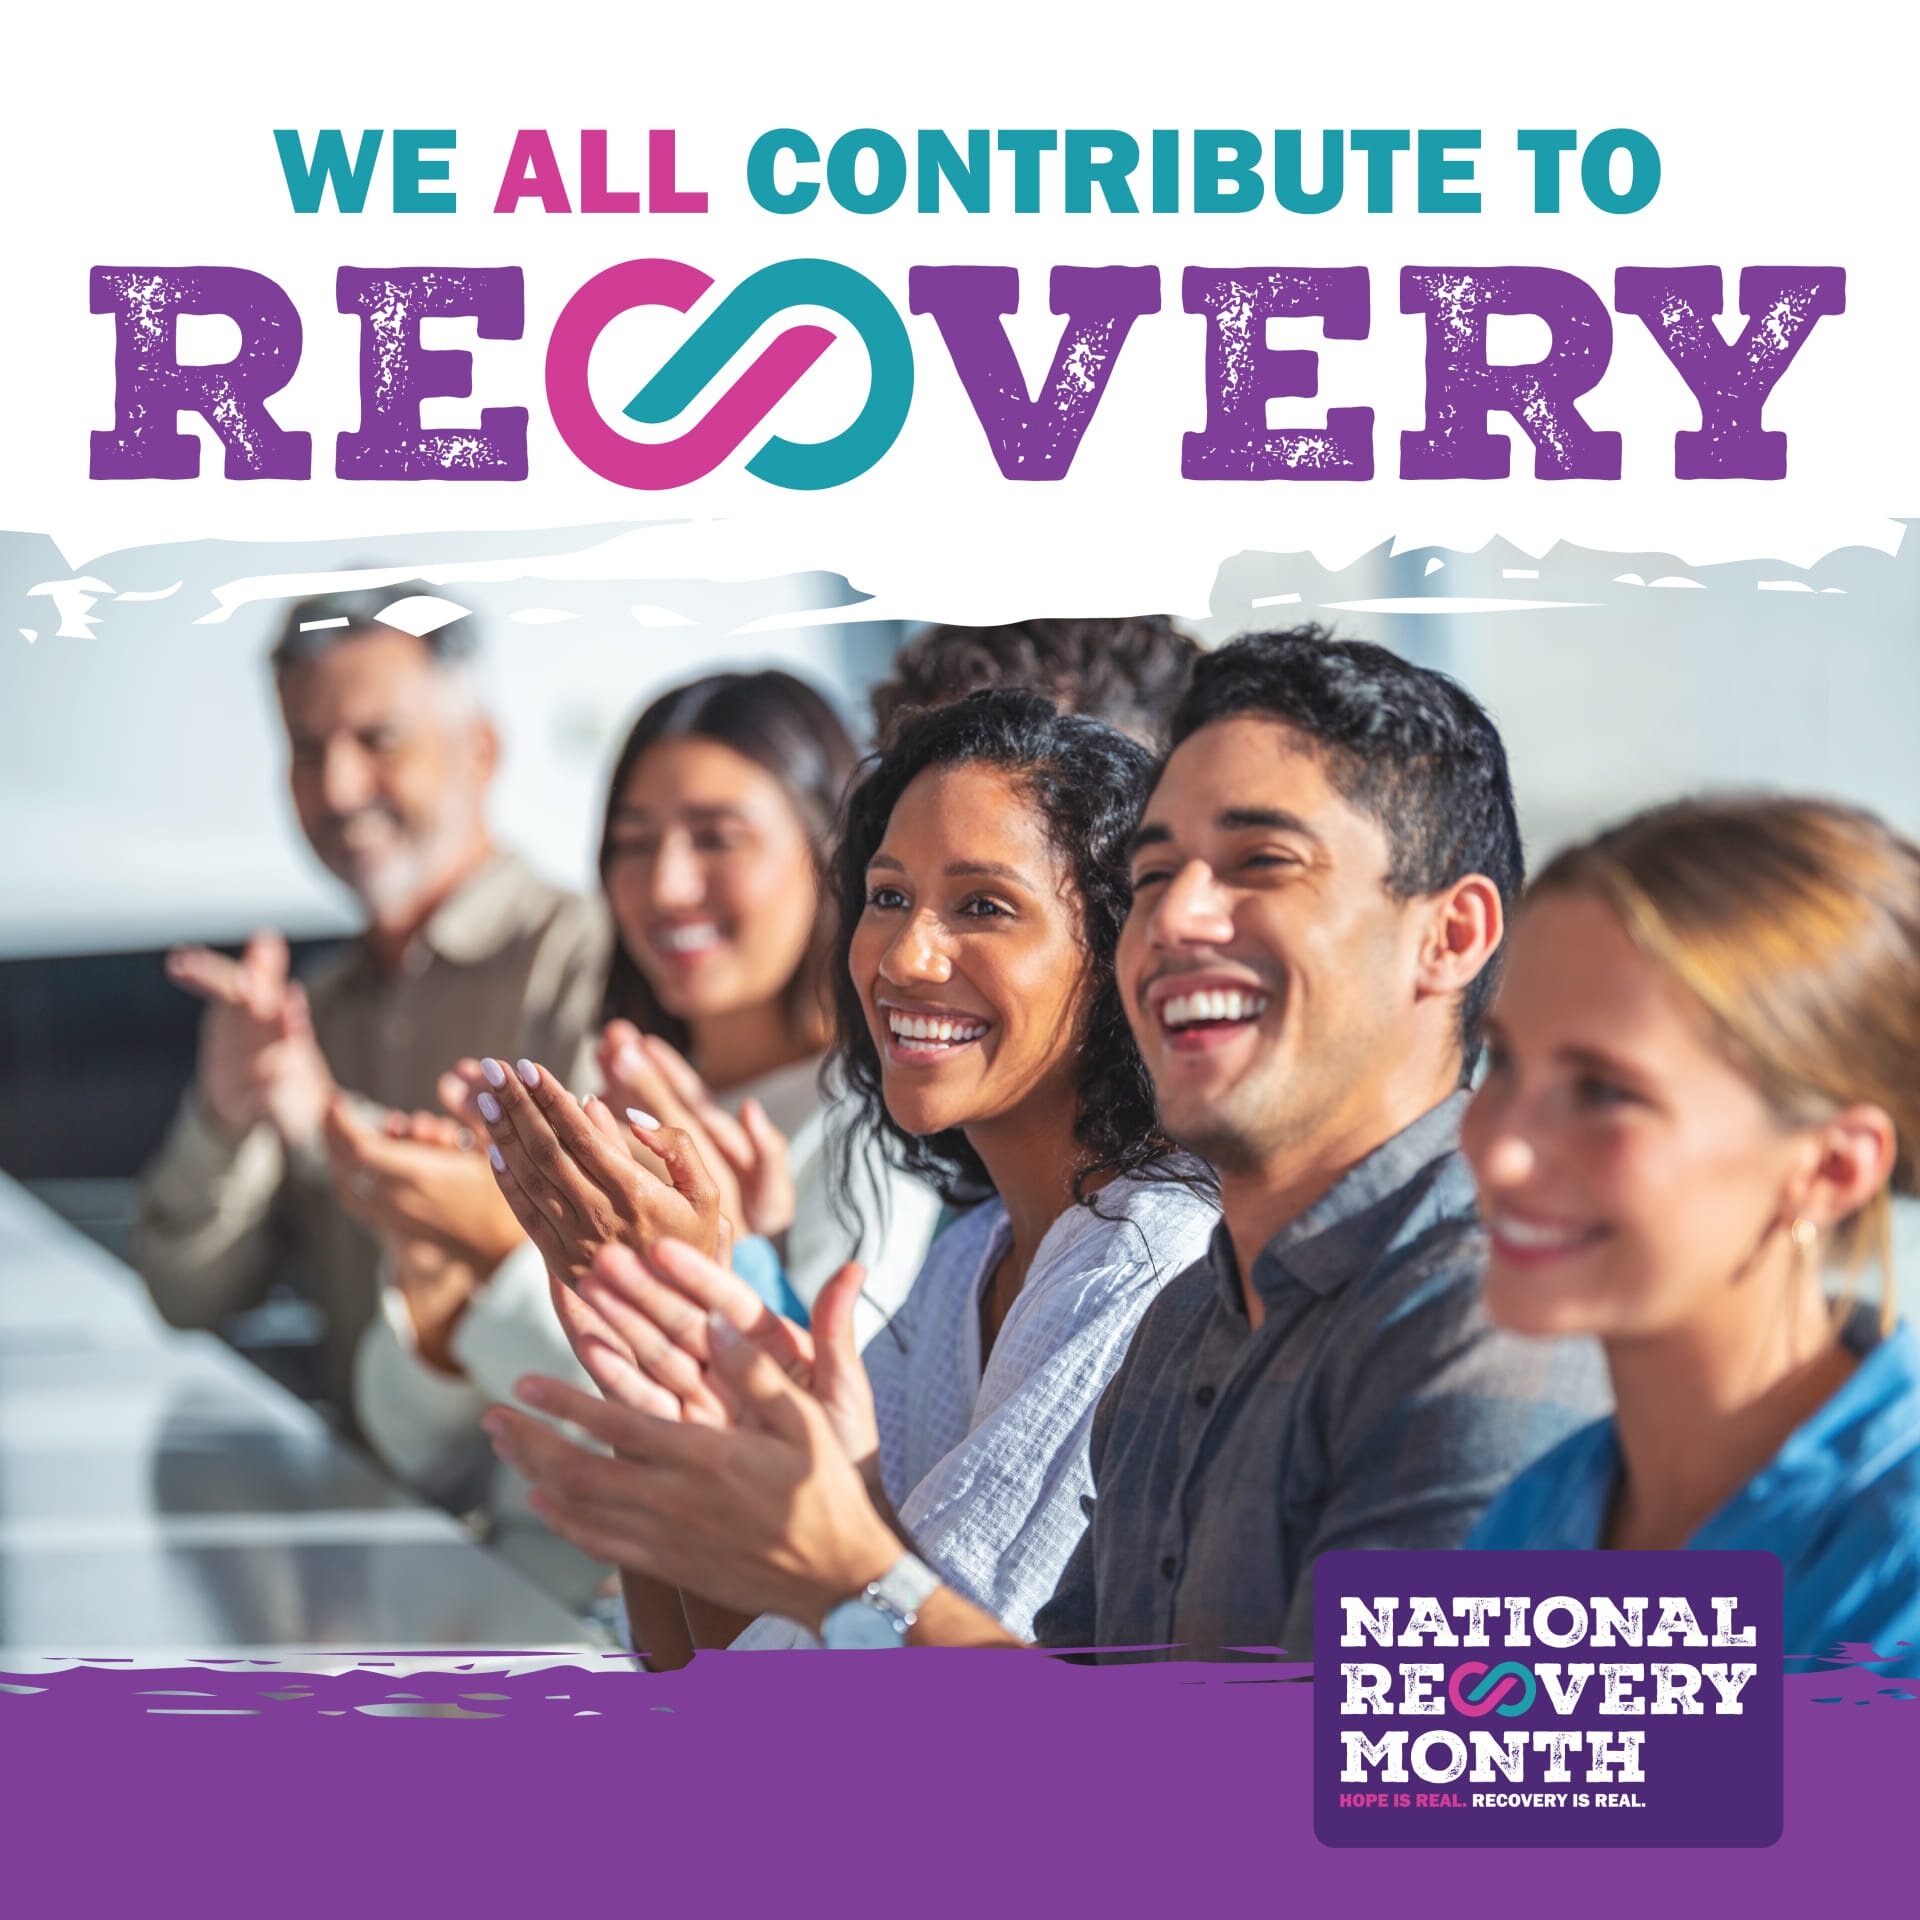 #Recovery groups are formed when people listen, share stories of #LivedExperience, and learn from each other. Learn how you can find support: samhsa.gov/find-support/health-care-or-support #RecoveryMonth #RecoveryIsPossible